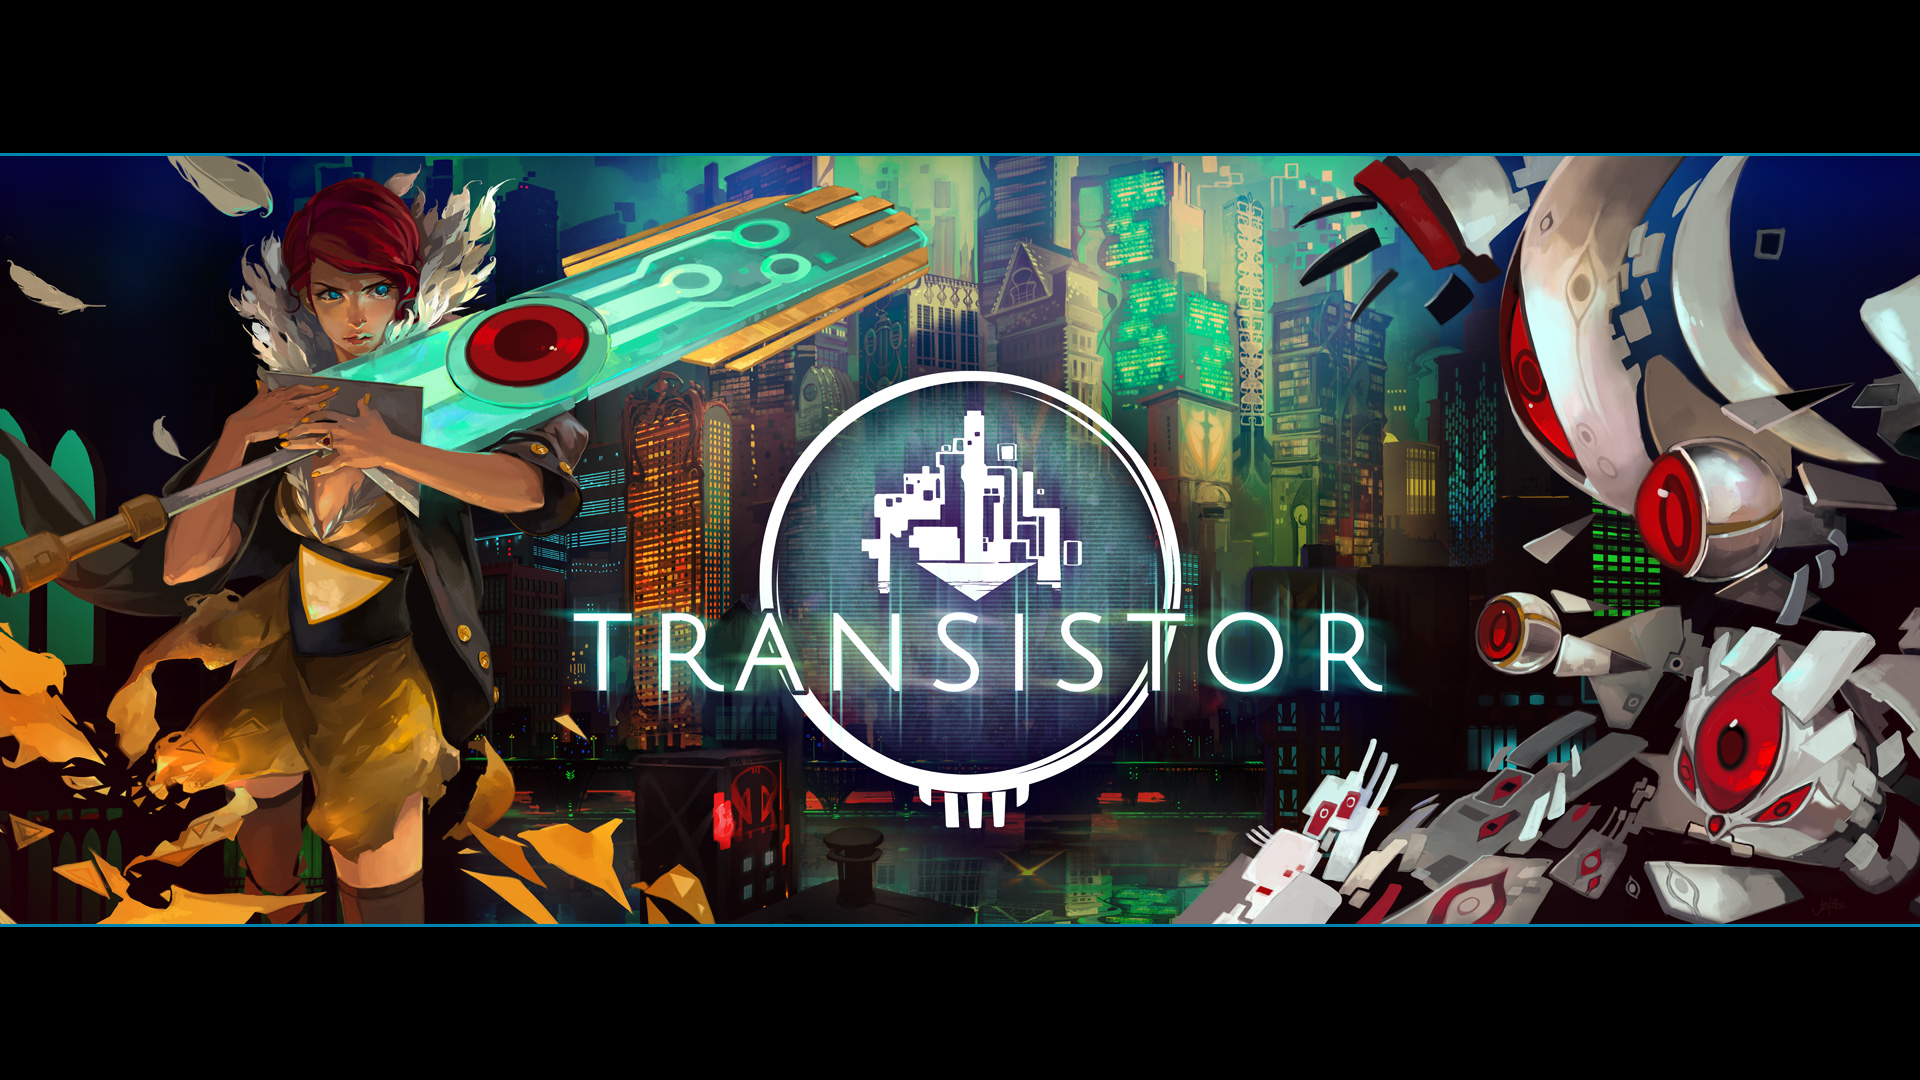 HD desktop wallpaper featuring artwork from the game Transistor, with a character holding a large sword set against a vibrant, futuristic cityscape.